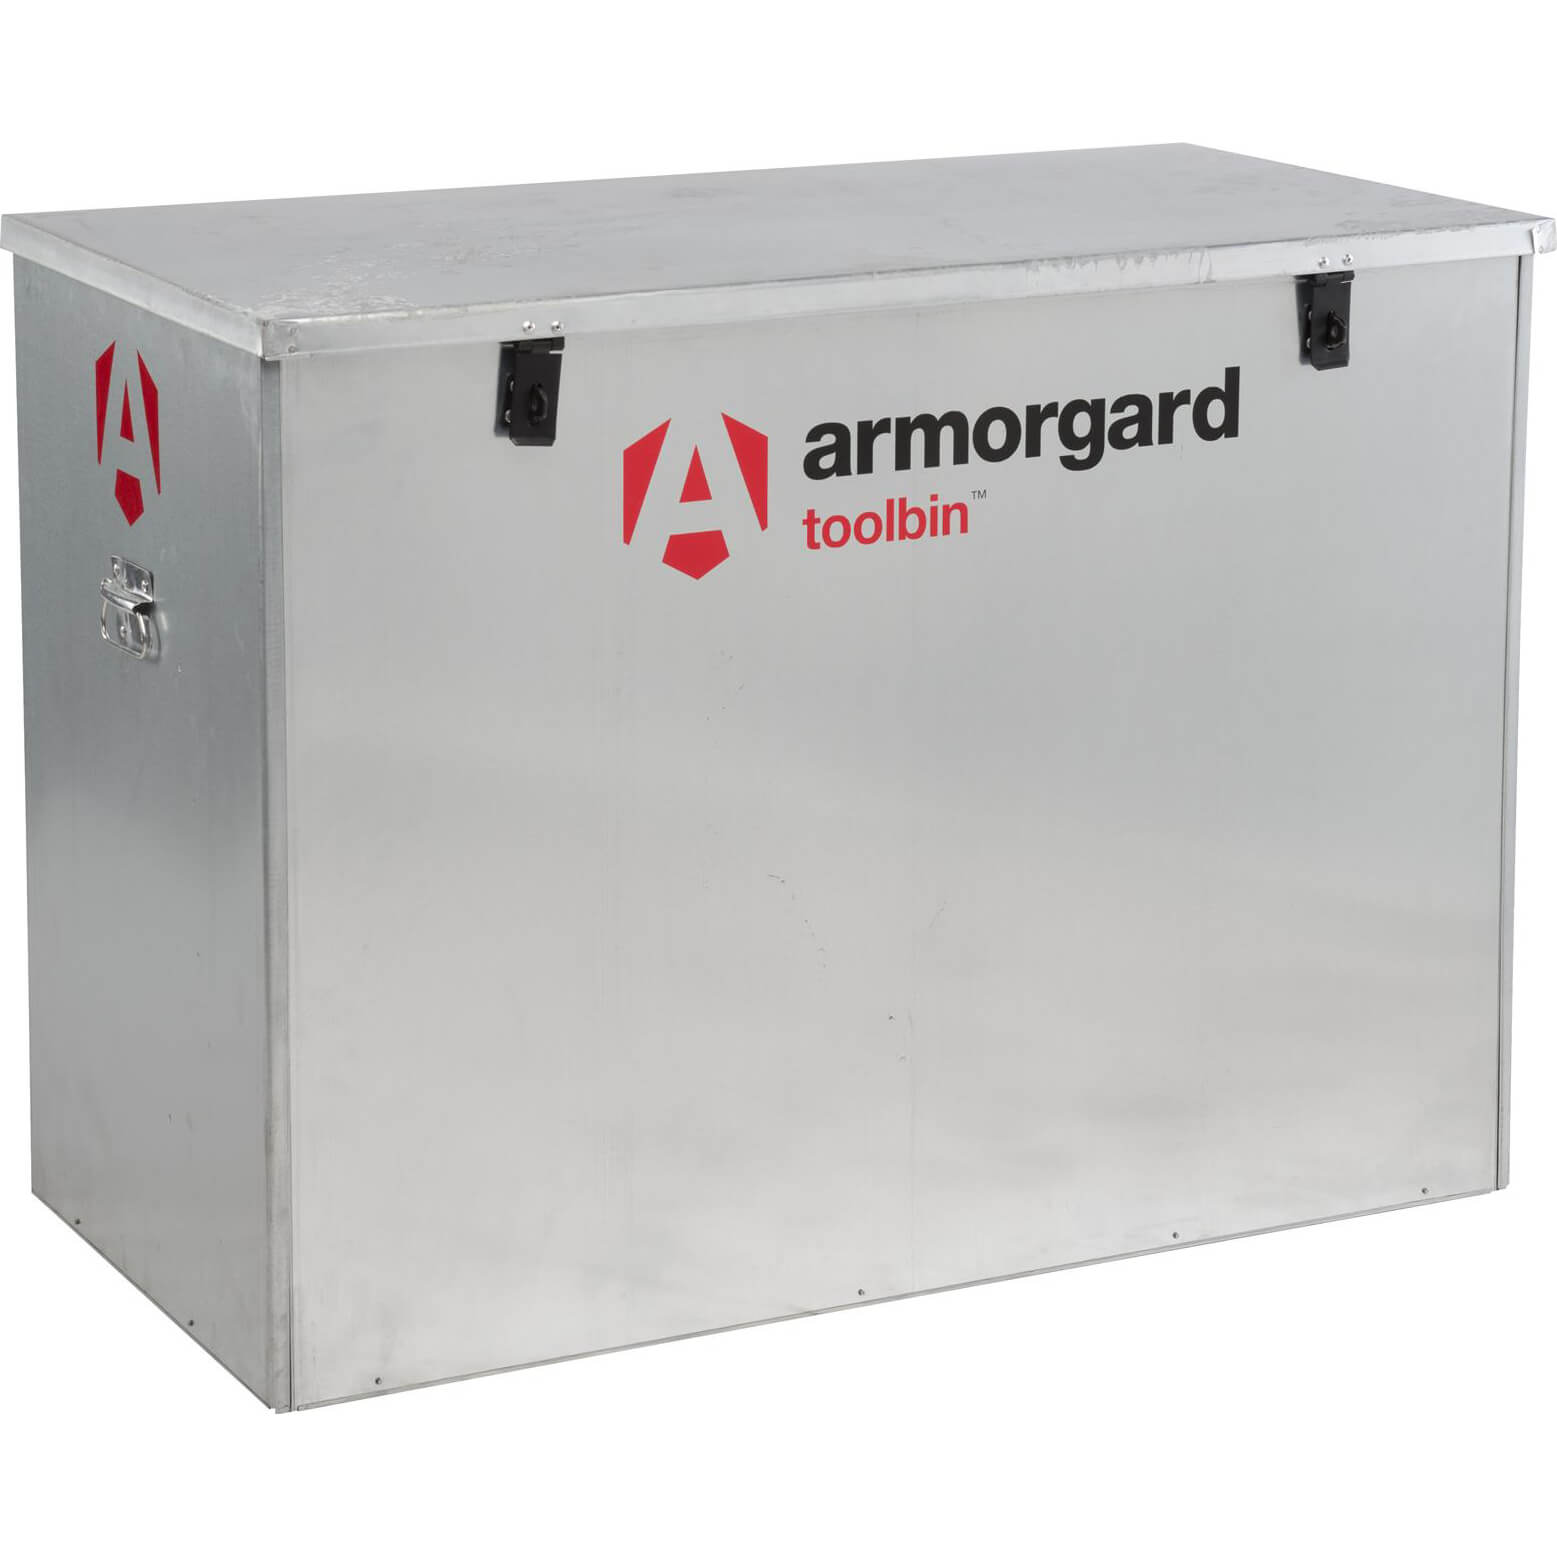 Armorgard Toolbin Galvanised Secure Tool Storage Chest 1190mm 585mm 850mm